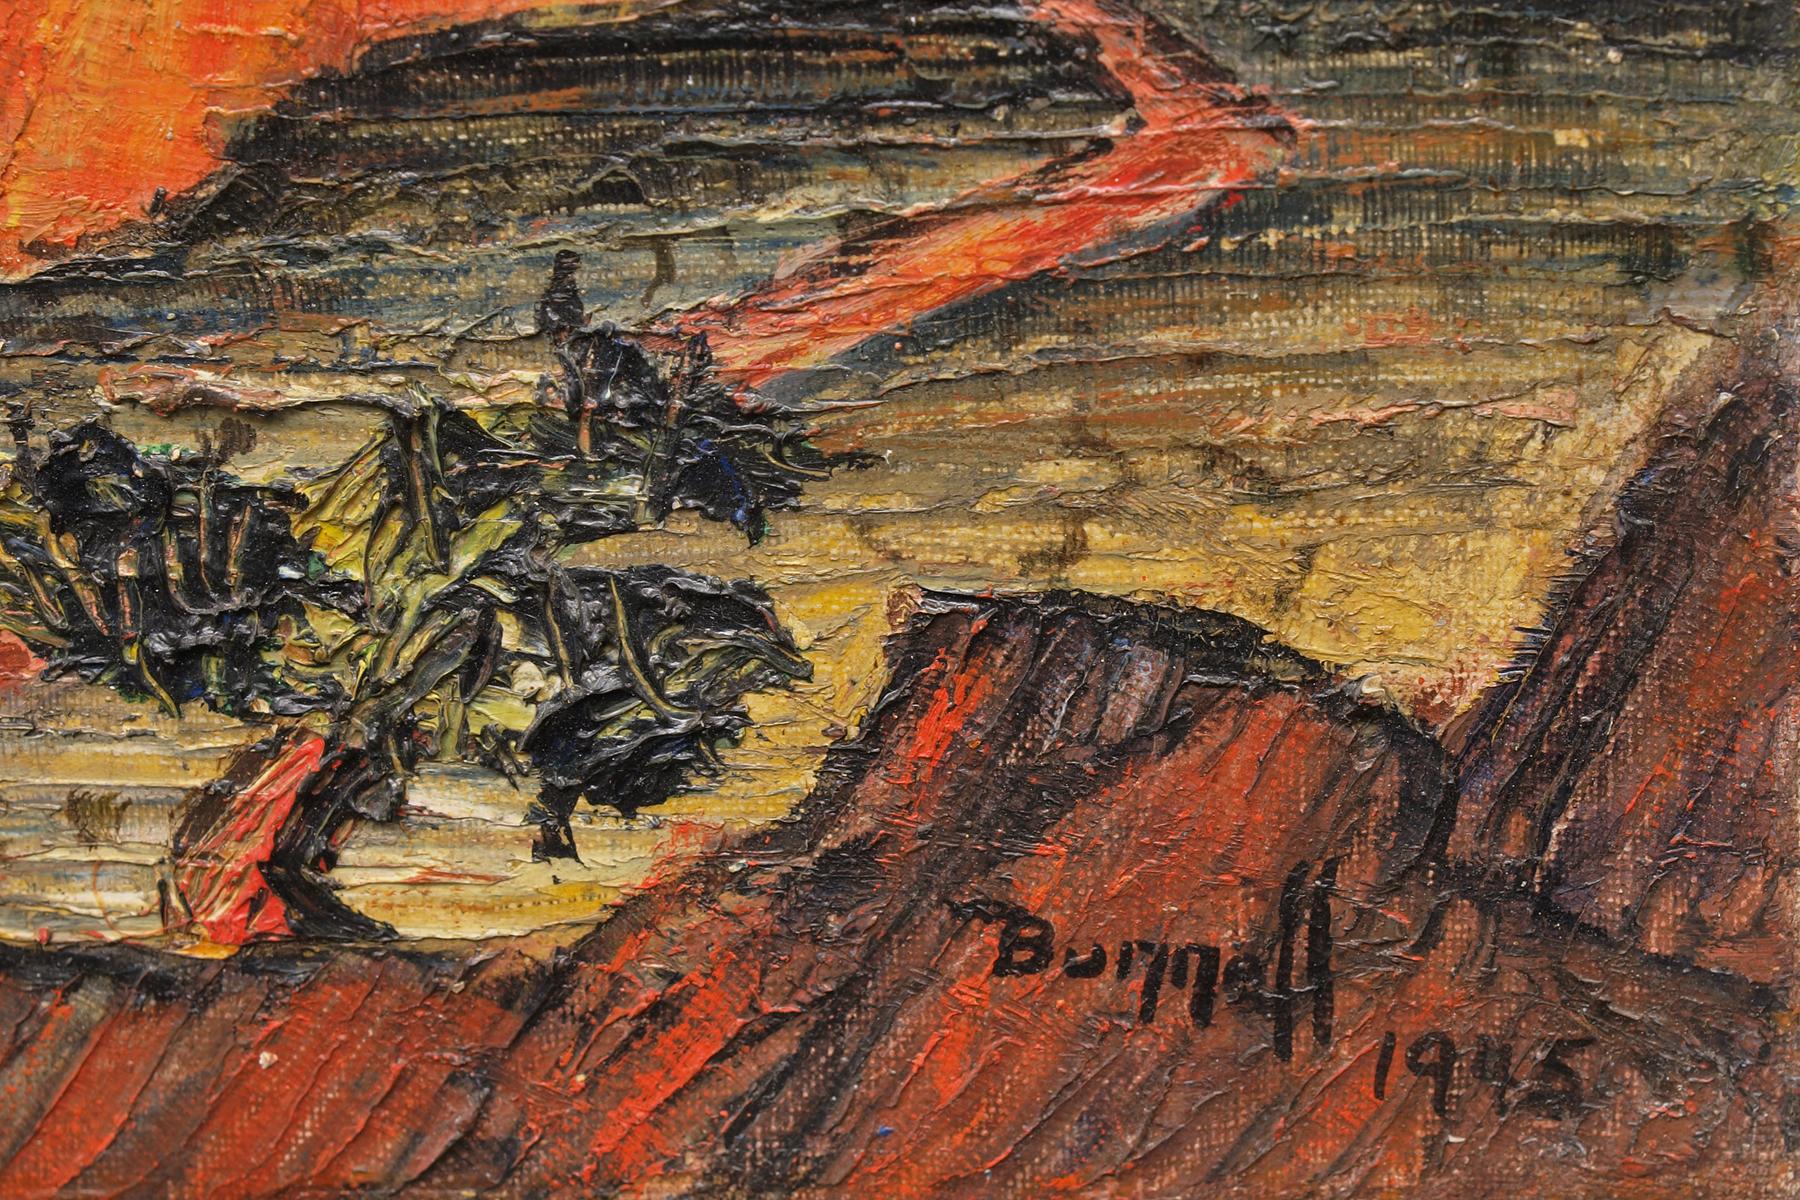 bunnell painting